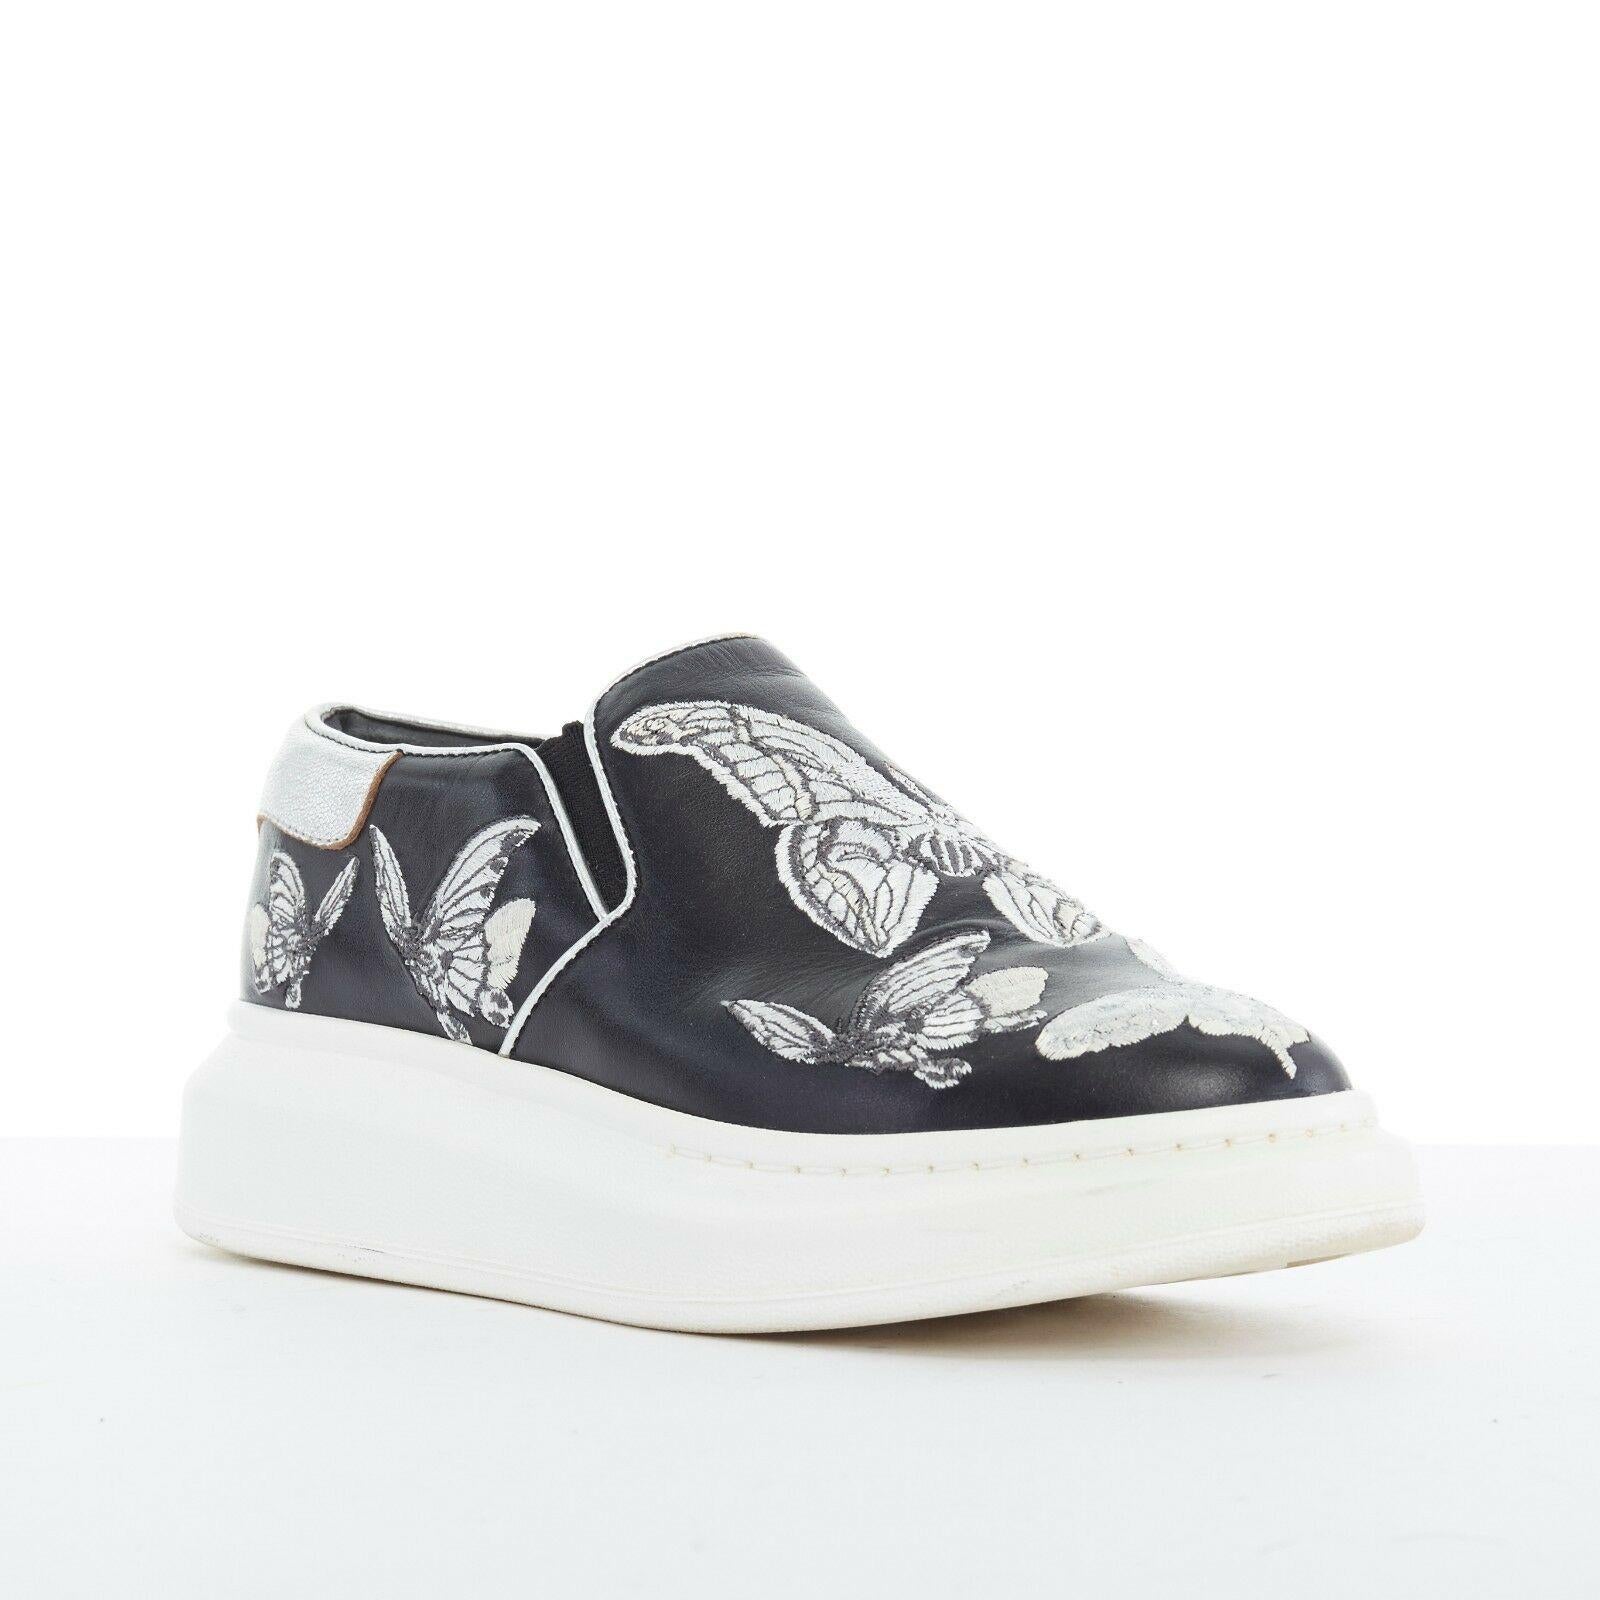 ALEXANDER MCQUEEN black butterfly embroidery leather chunky sole sneakers EU36.5
Brand: Alexander McQueen
Model Name / Style: Slip on sneakers
Material: Leather
Color: Black
Pattern: Other; butterfly
Extra Detail: Round Toe. Chunky heel.
Made in: